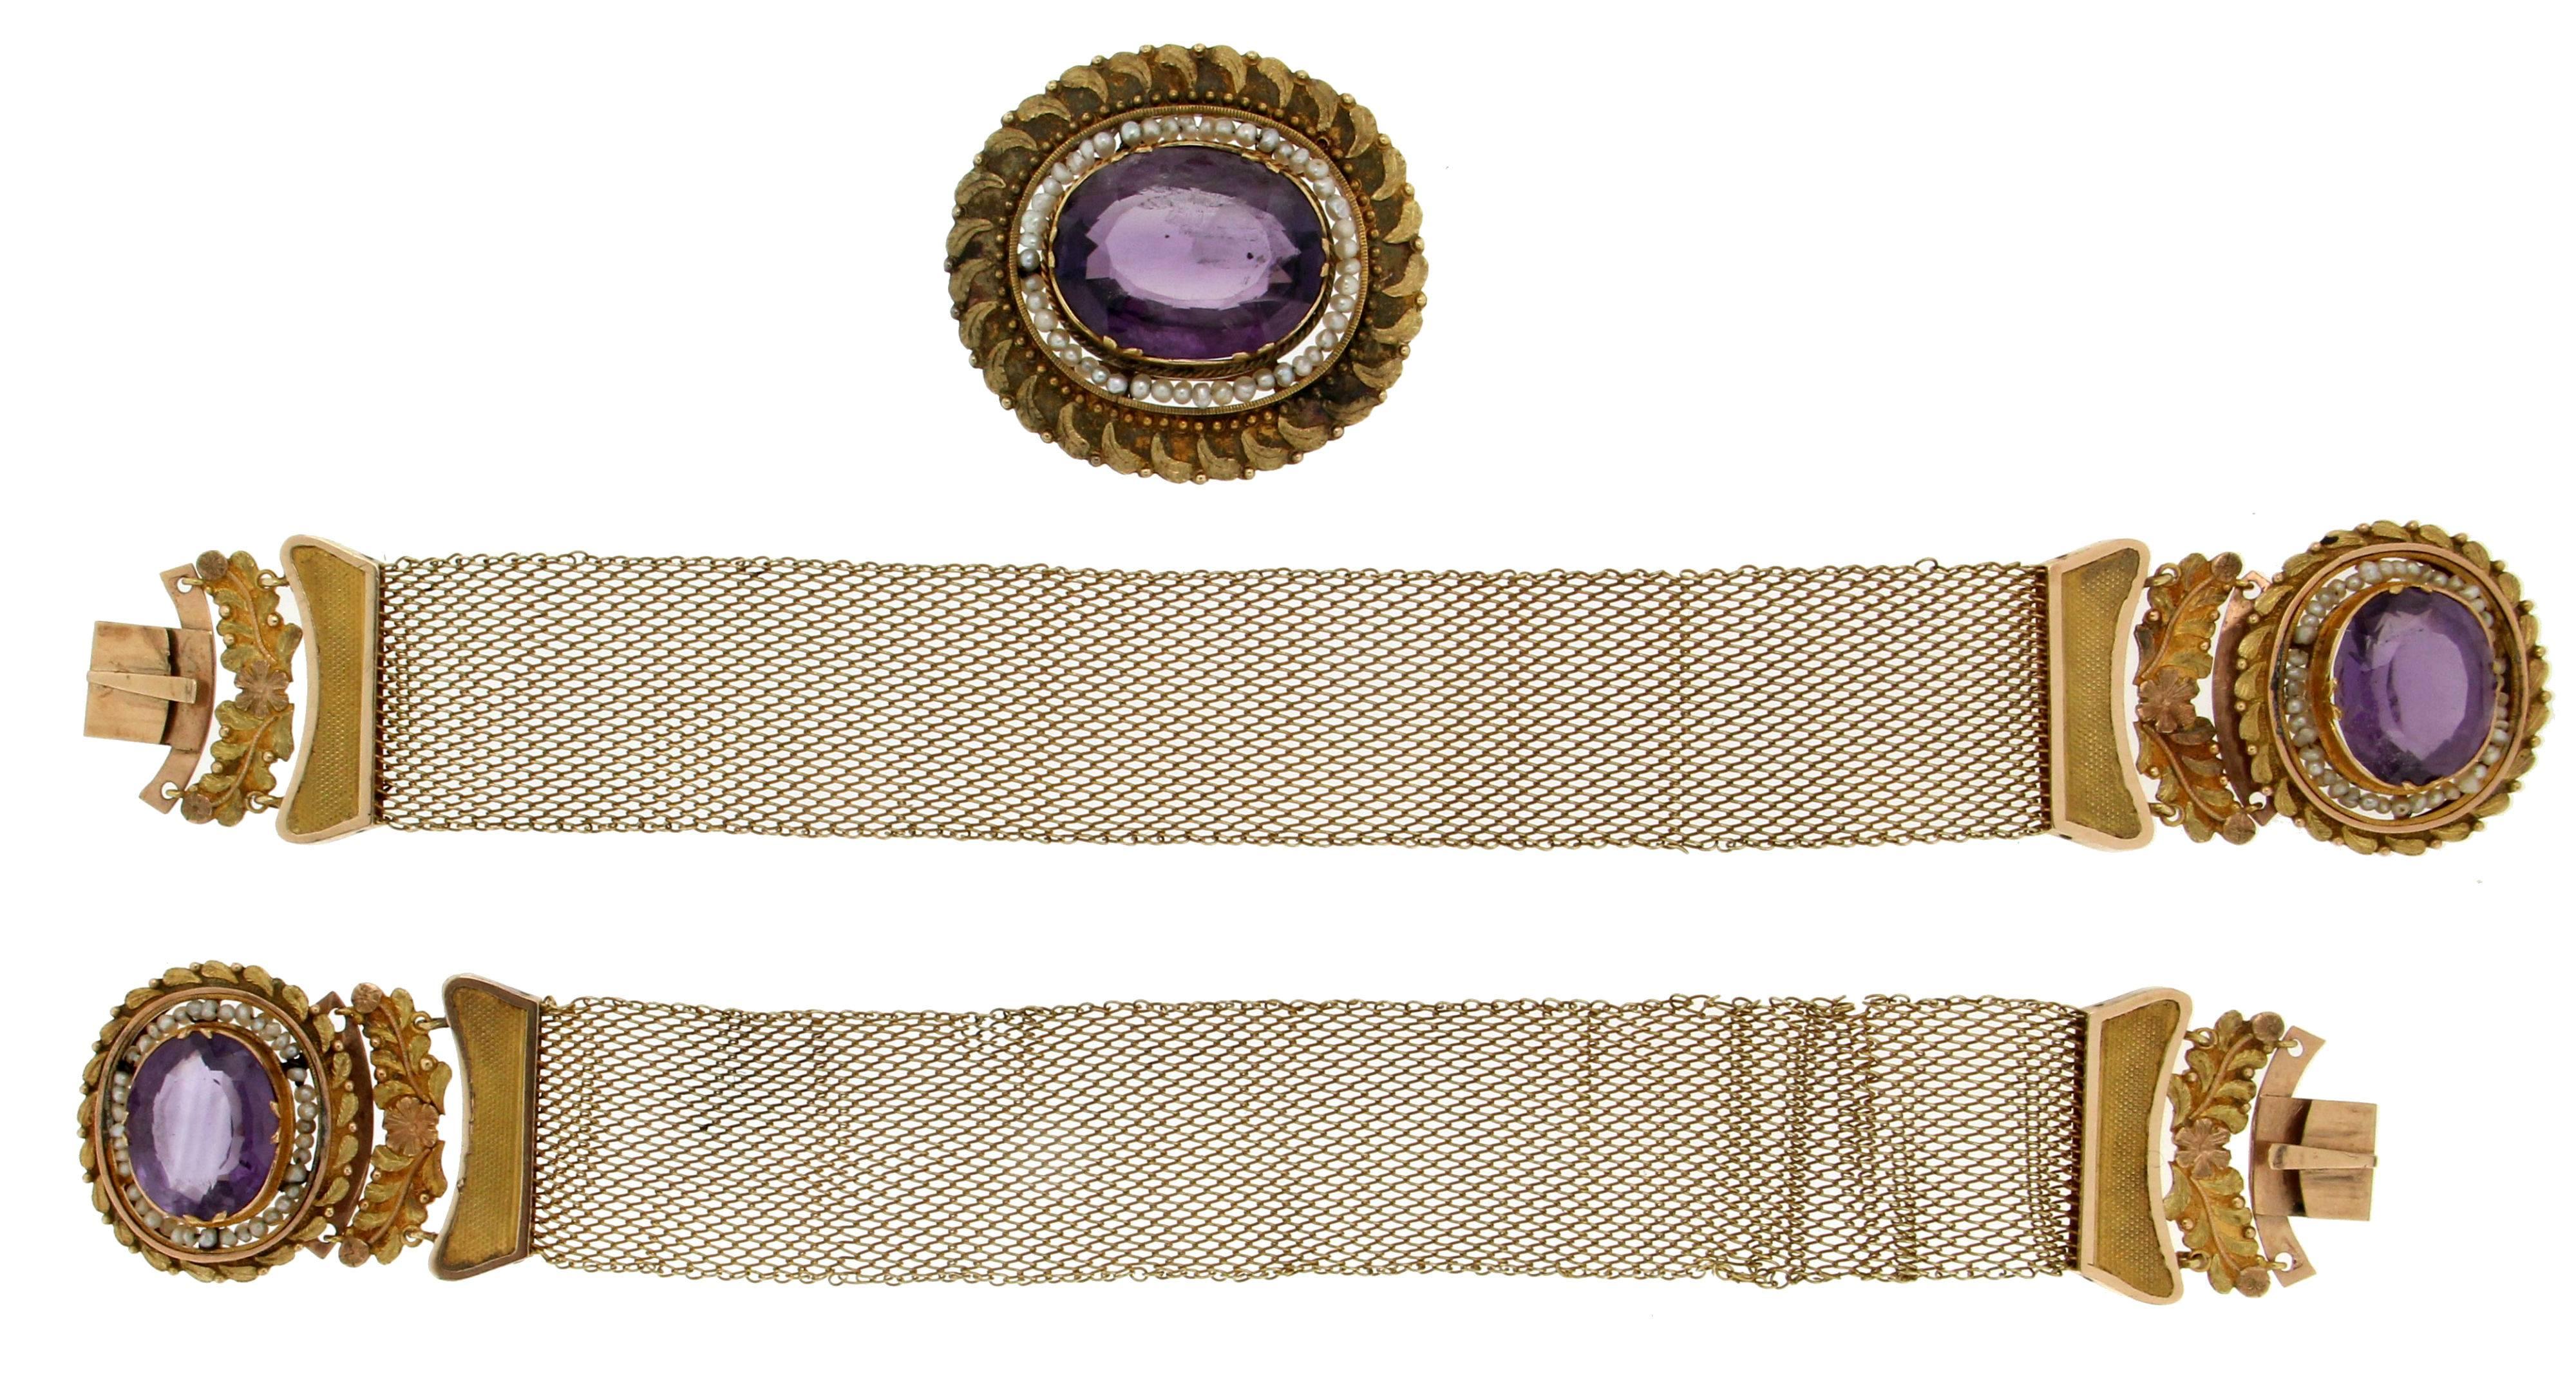 Vintage Gold Amethyst And Pearls Cuff Bracelet Set, Is Possibile Change Like Necklace, Also There Is Brooch

Total Weight Set 38.80 grams
Bracelet length 16.50 cm